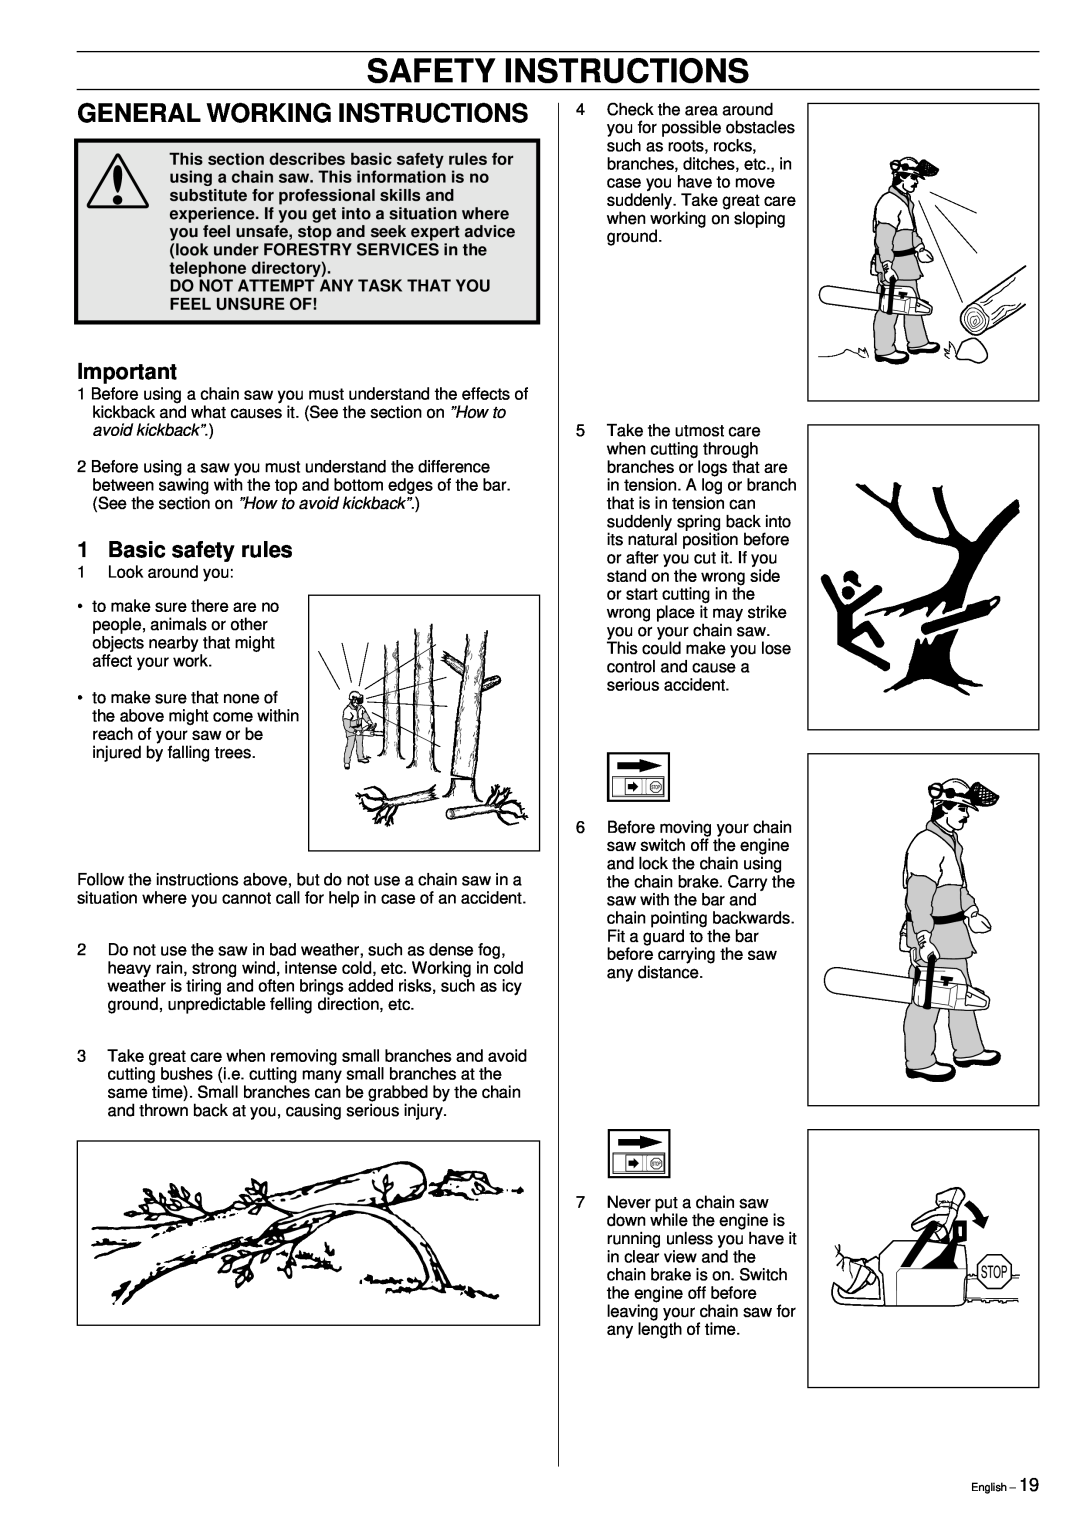 Husqvarna 51 manual Safety Instructions, General Working Instructions, Basic safety rules 